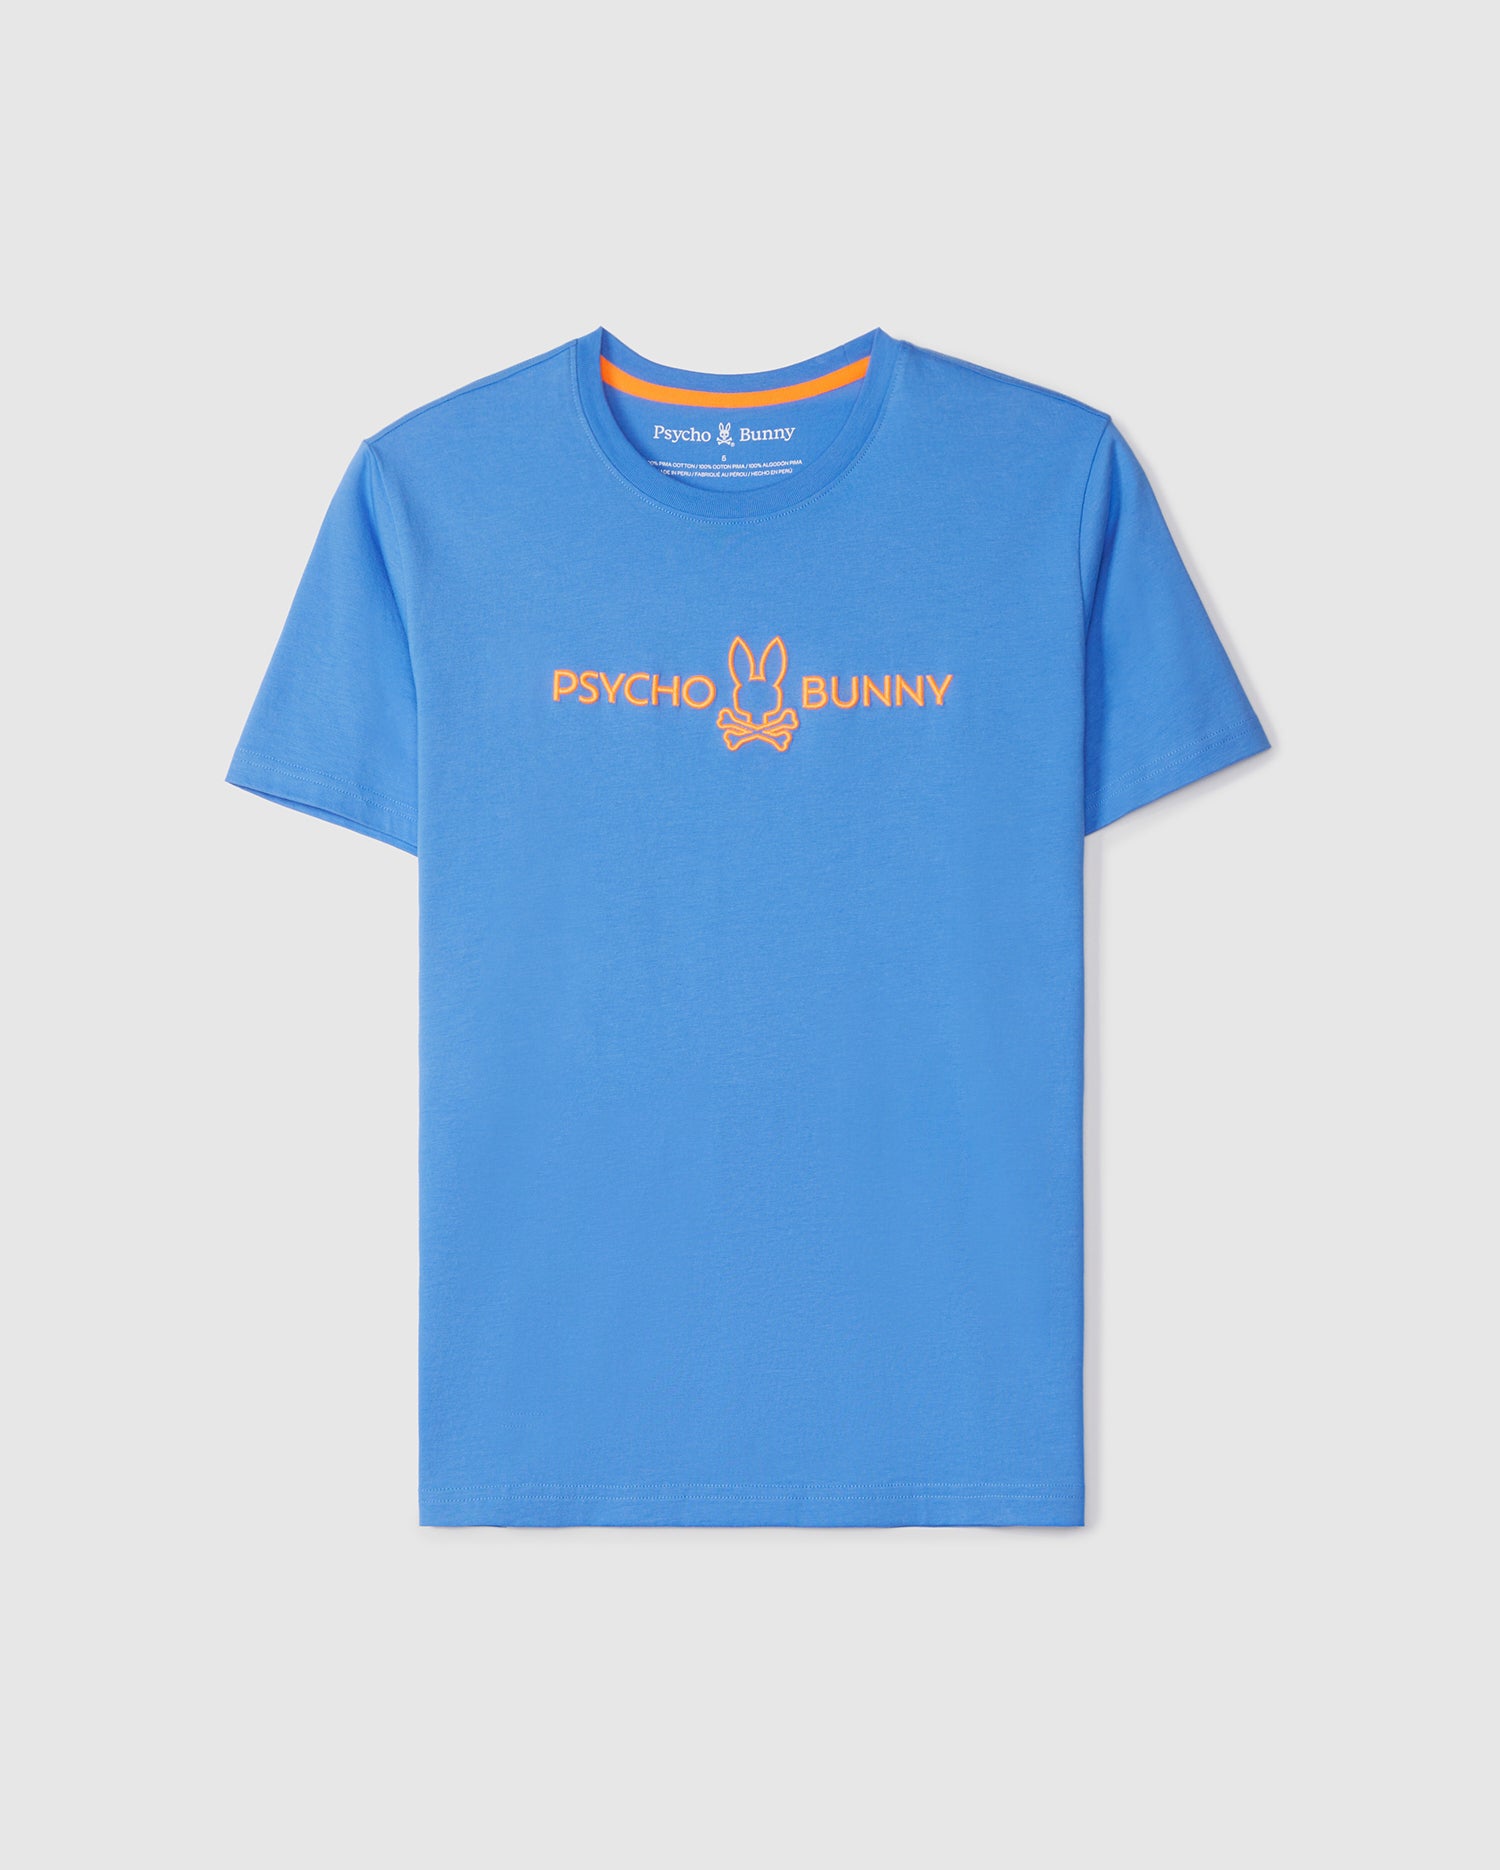 A blue graphic tee with short sleeves, made from soft Peruvian Pima cotton. The front features 